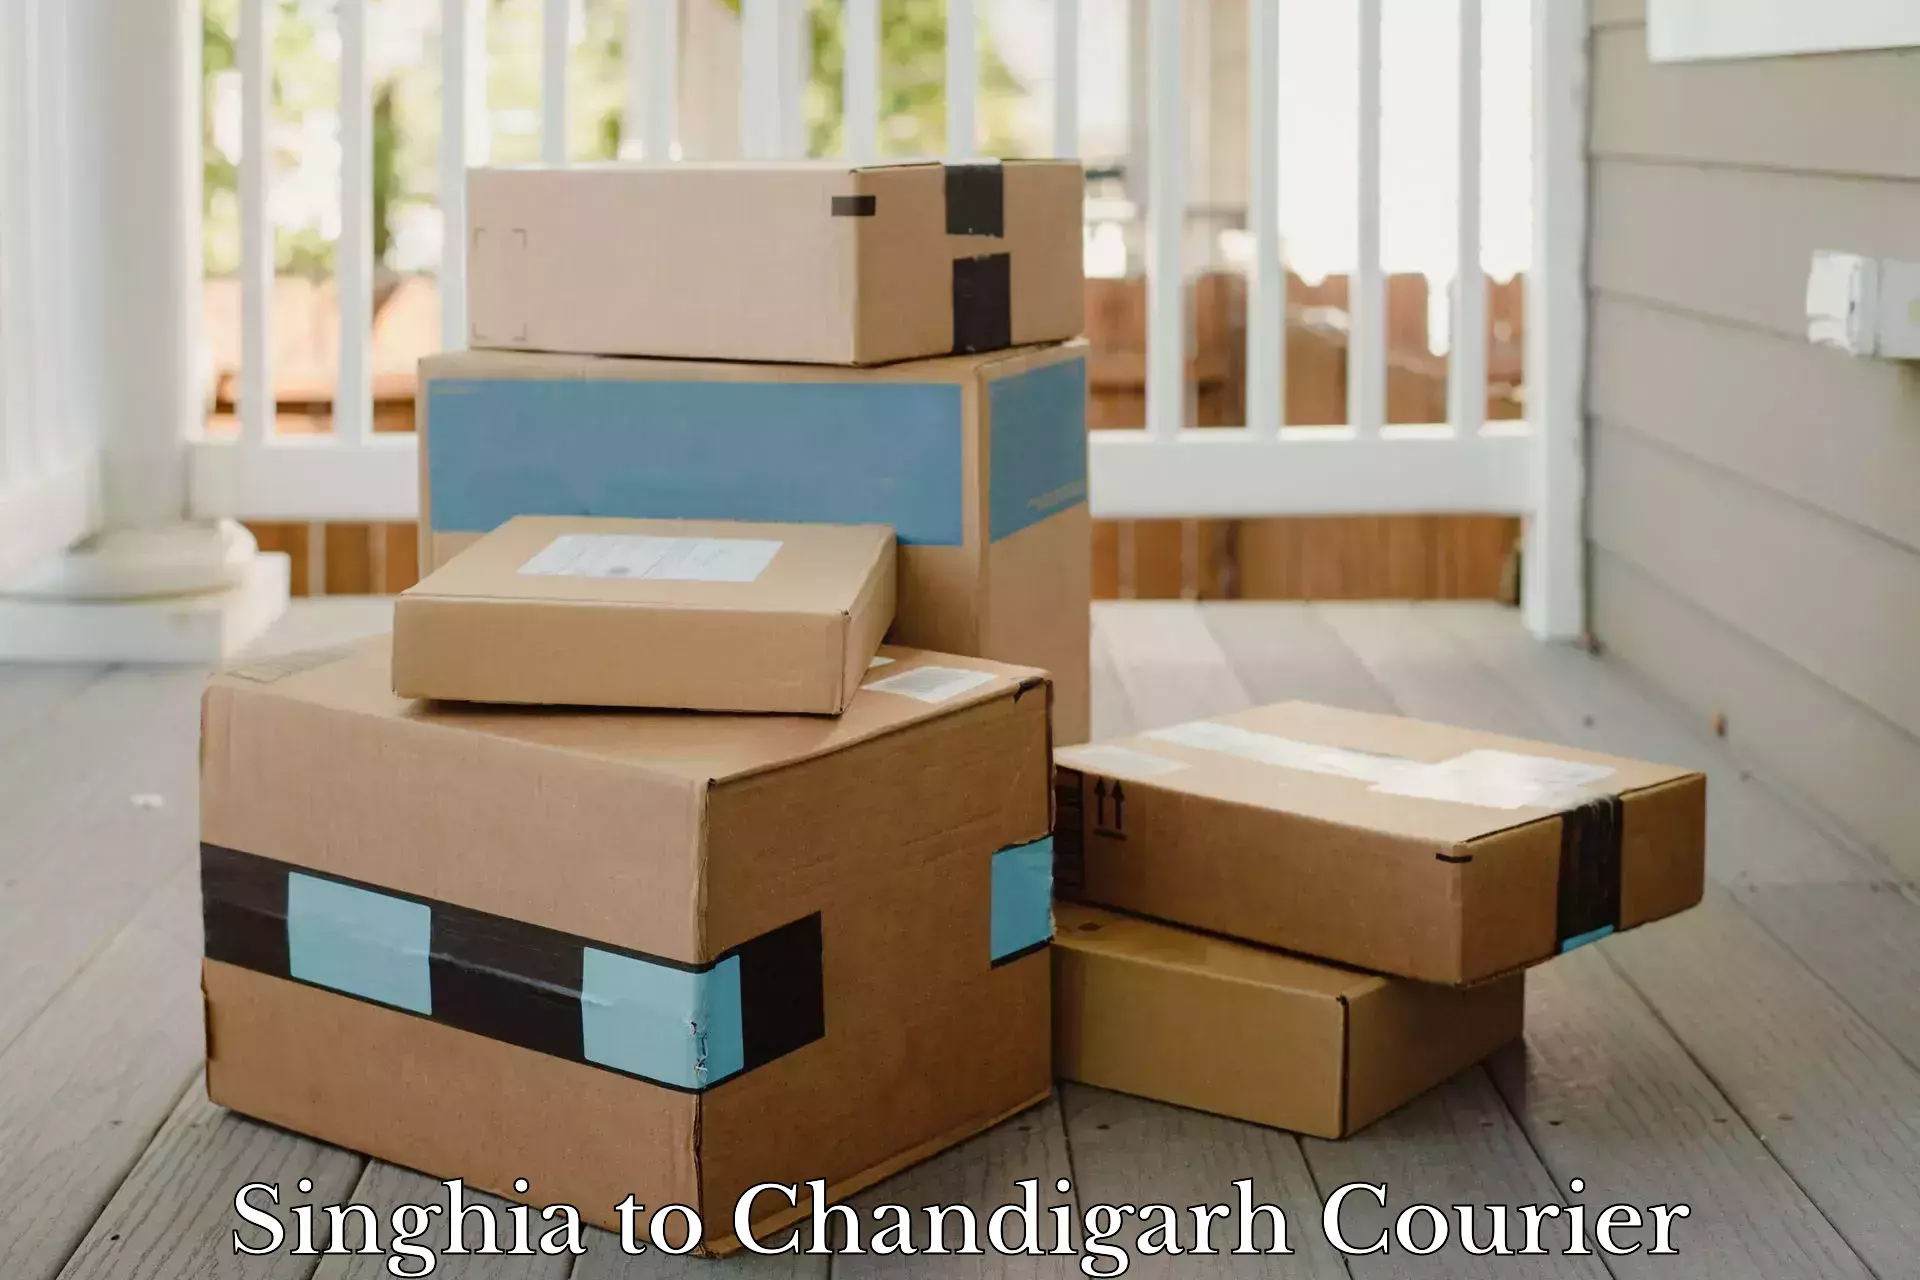 Streamlined delivery processes Singhia to Chandigarh